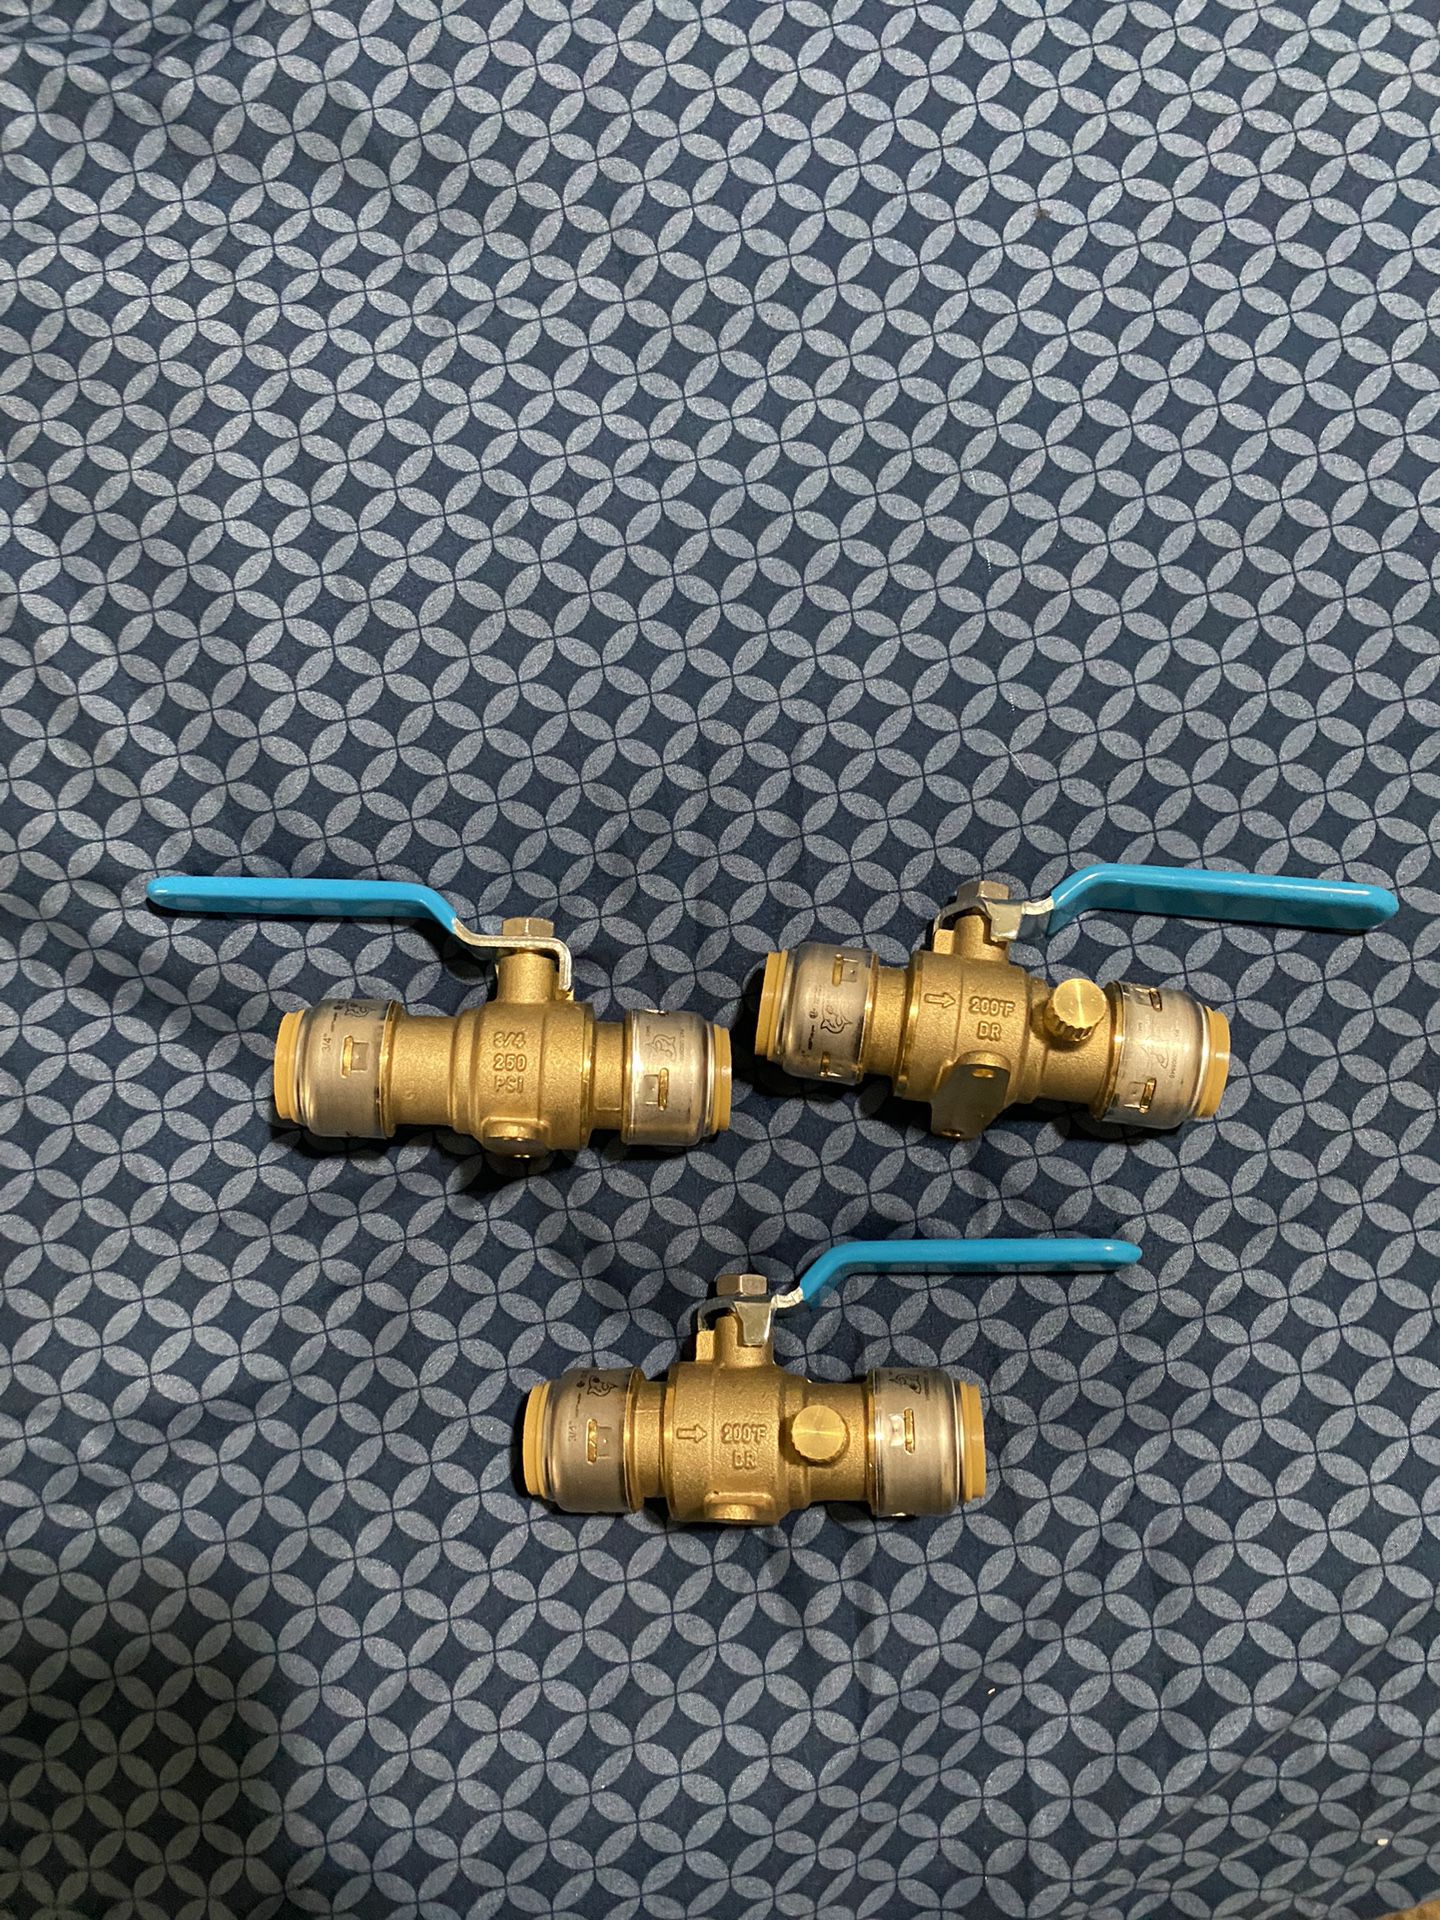 3 Pack Of 3-4 Push To Connect Brass Ball Valve With Drain $ Mounting Tabs. Price Is $45 Cash At Meet Up or $50 Delivered